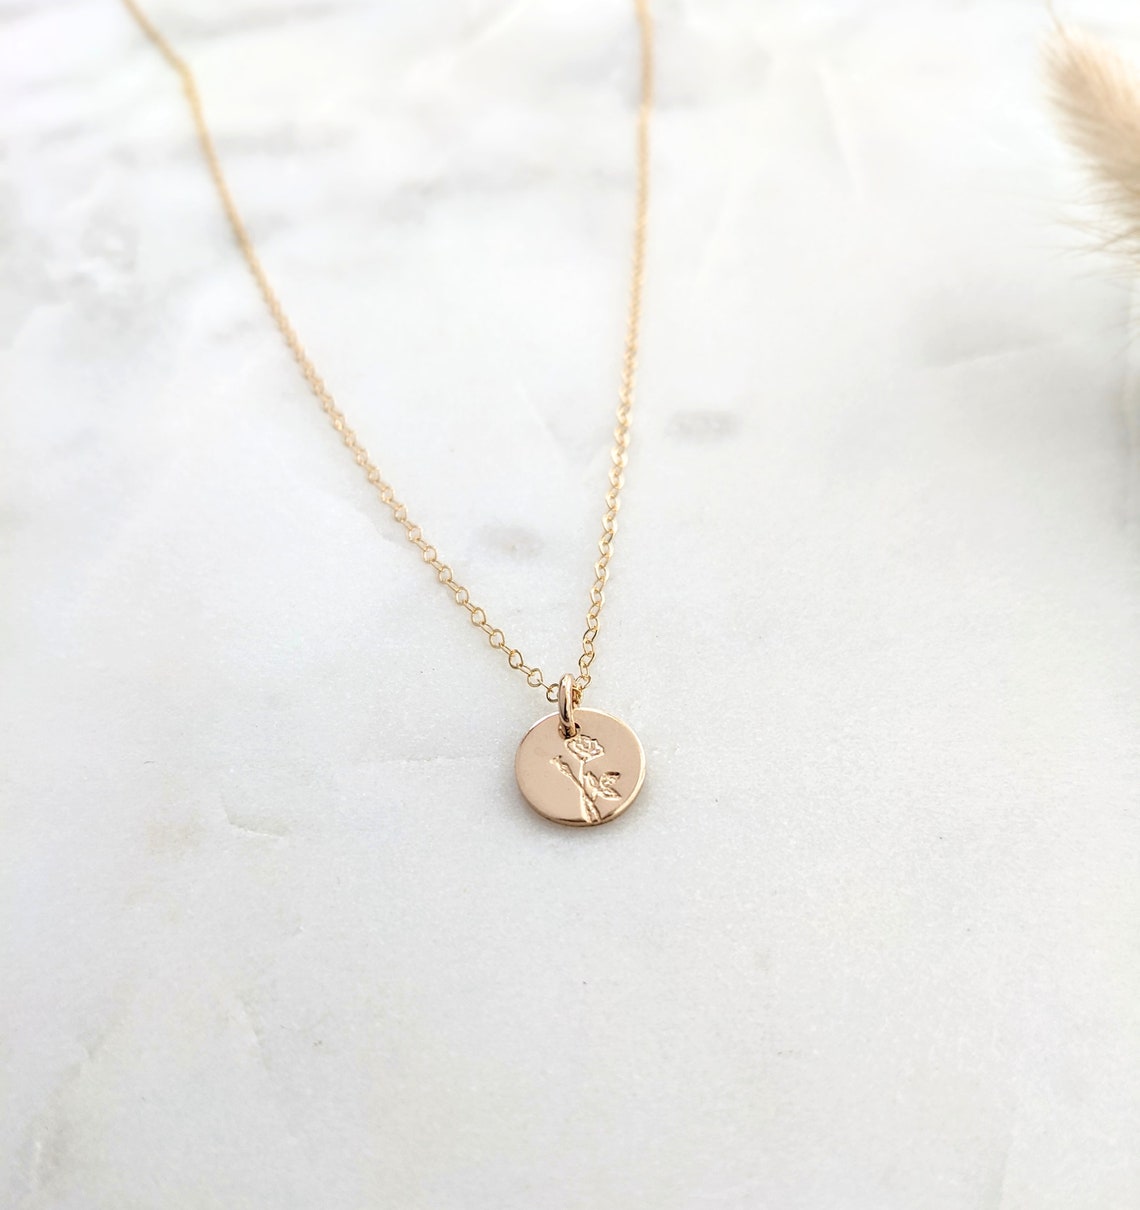 Miscarriage Memorial Necklace | Personalized Floral Charm